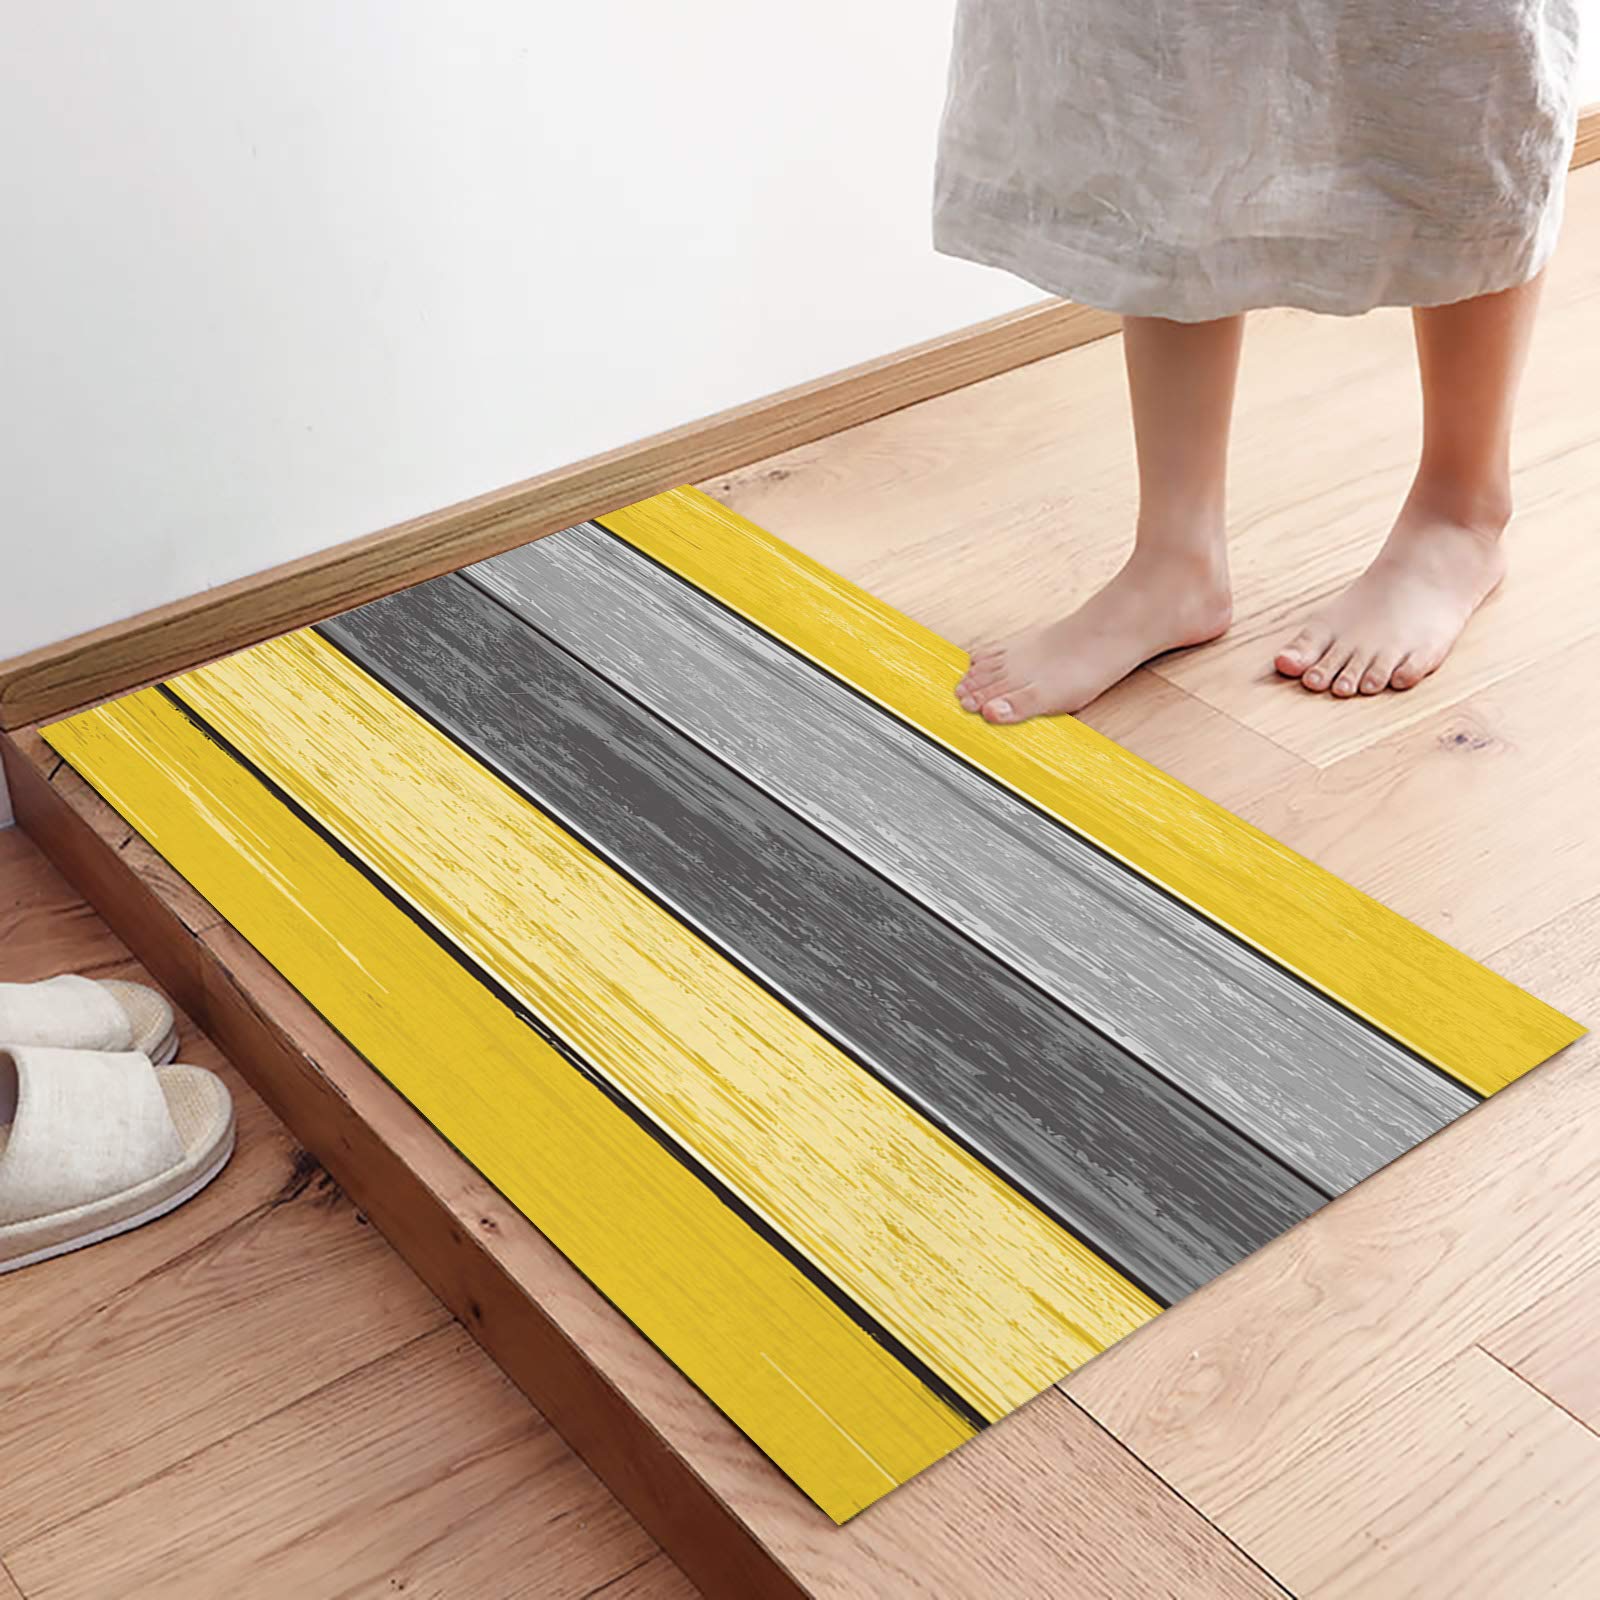 Door Mat for Bedroom Decor, Vintage Rustic Old Wooden Board Yellow Gray Floor Mats, Holiday Rugs for Living Room, Absorbent Non-Slip Bathroom Rugs Home Decor Kitchen Mat Area Rug 18x30 Inch